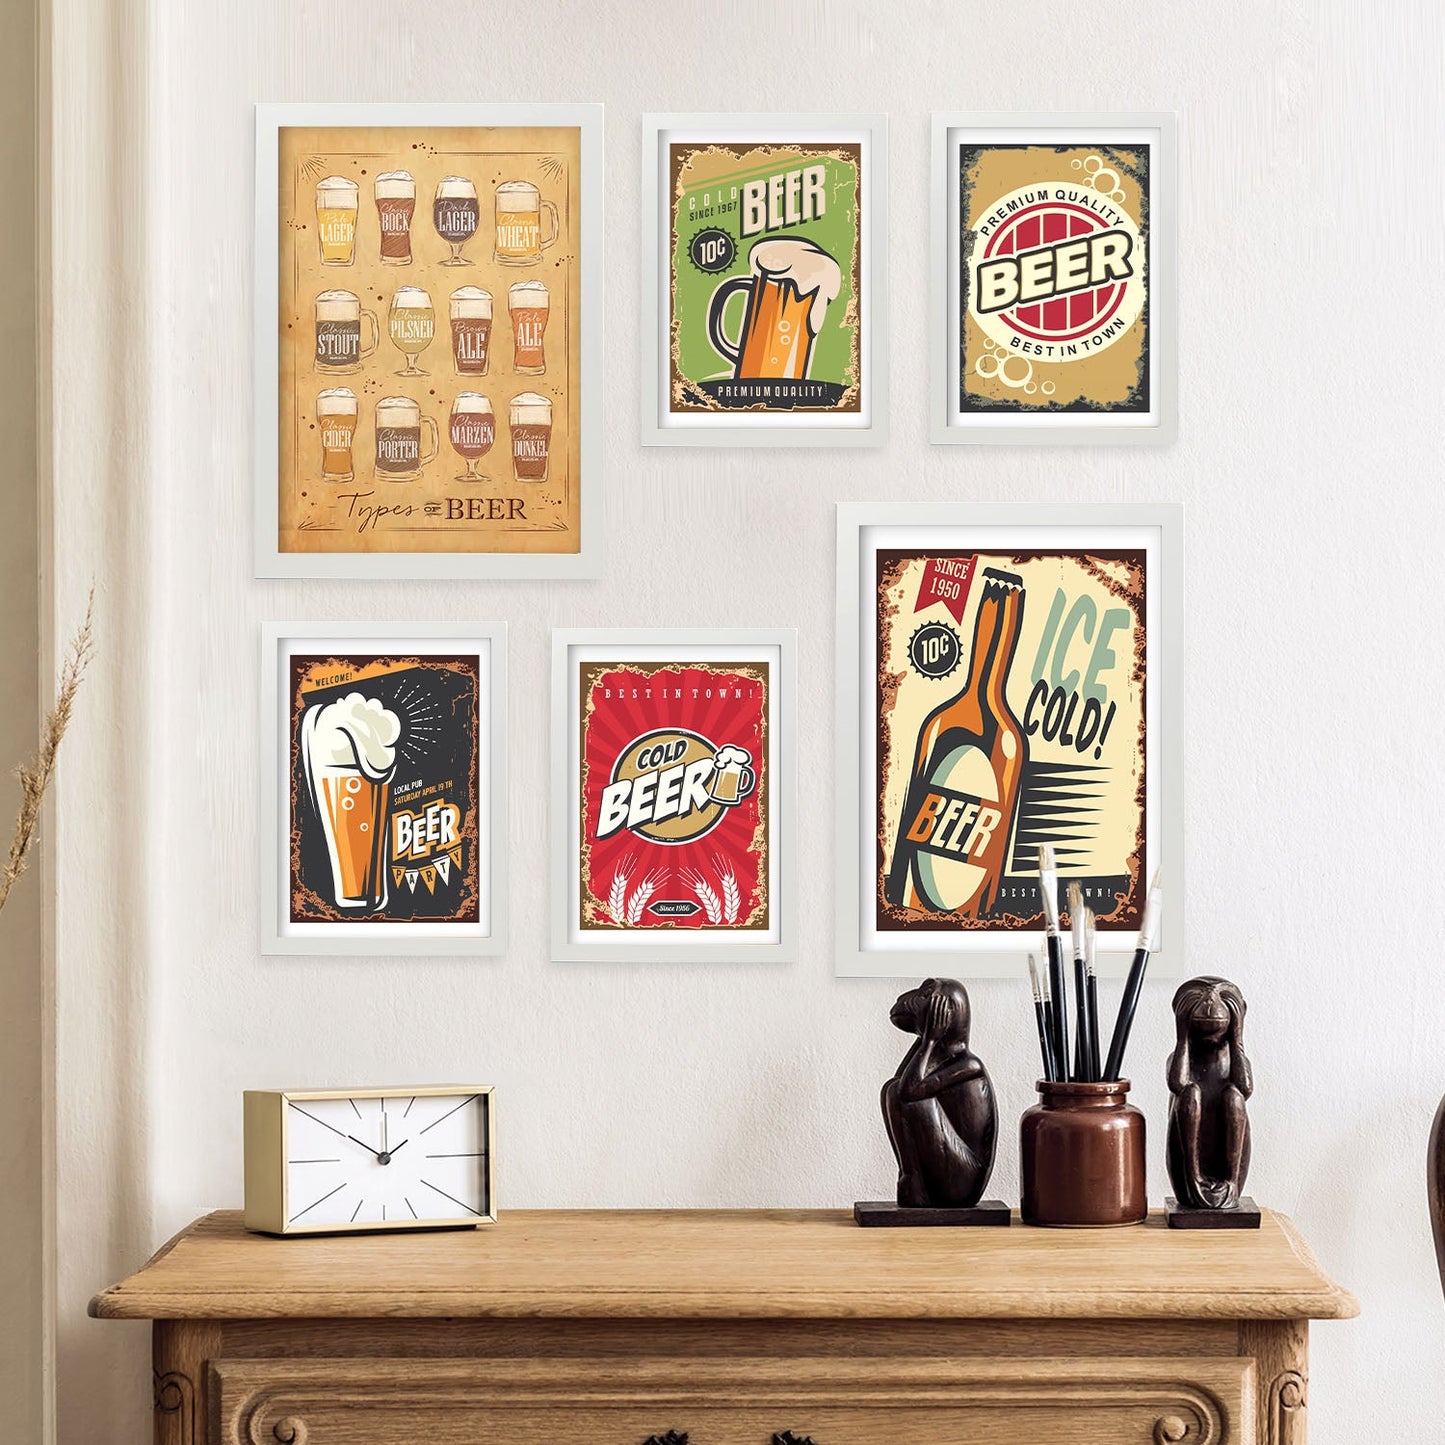 Nacnic CERVEZA. Aesthetic Wall Art Prints for Bedroom or Living Room Design.